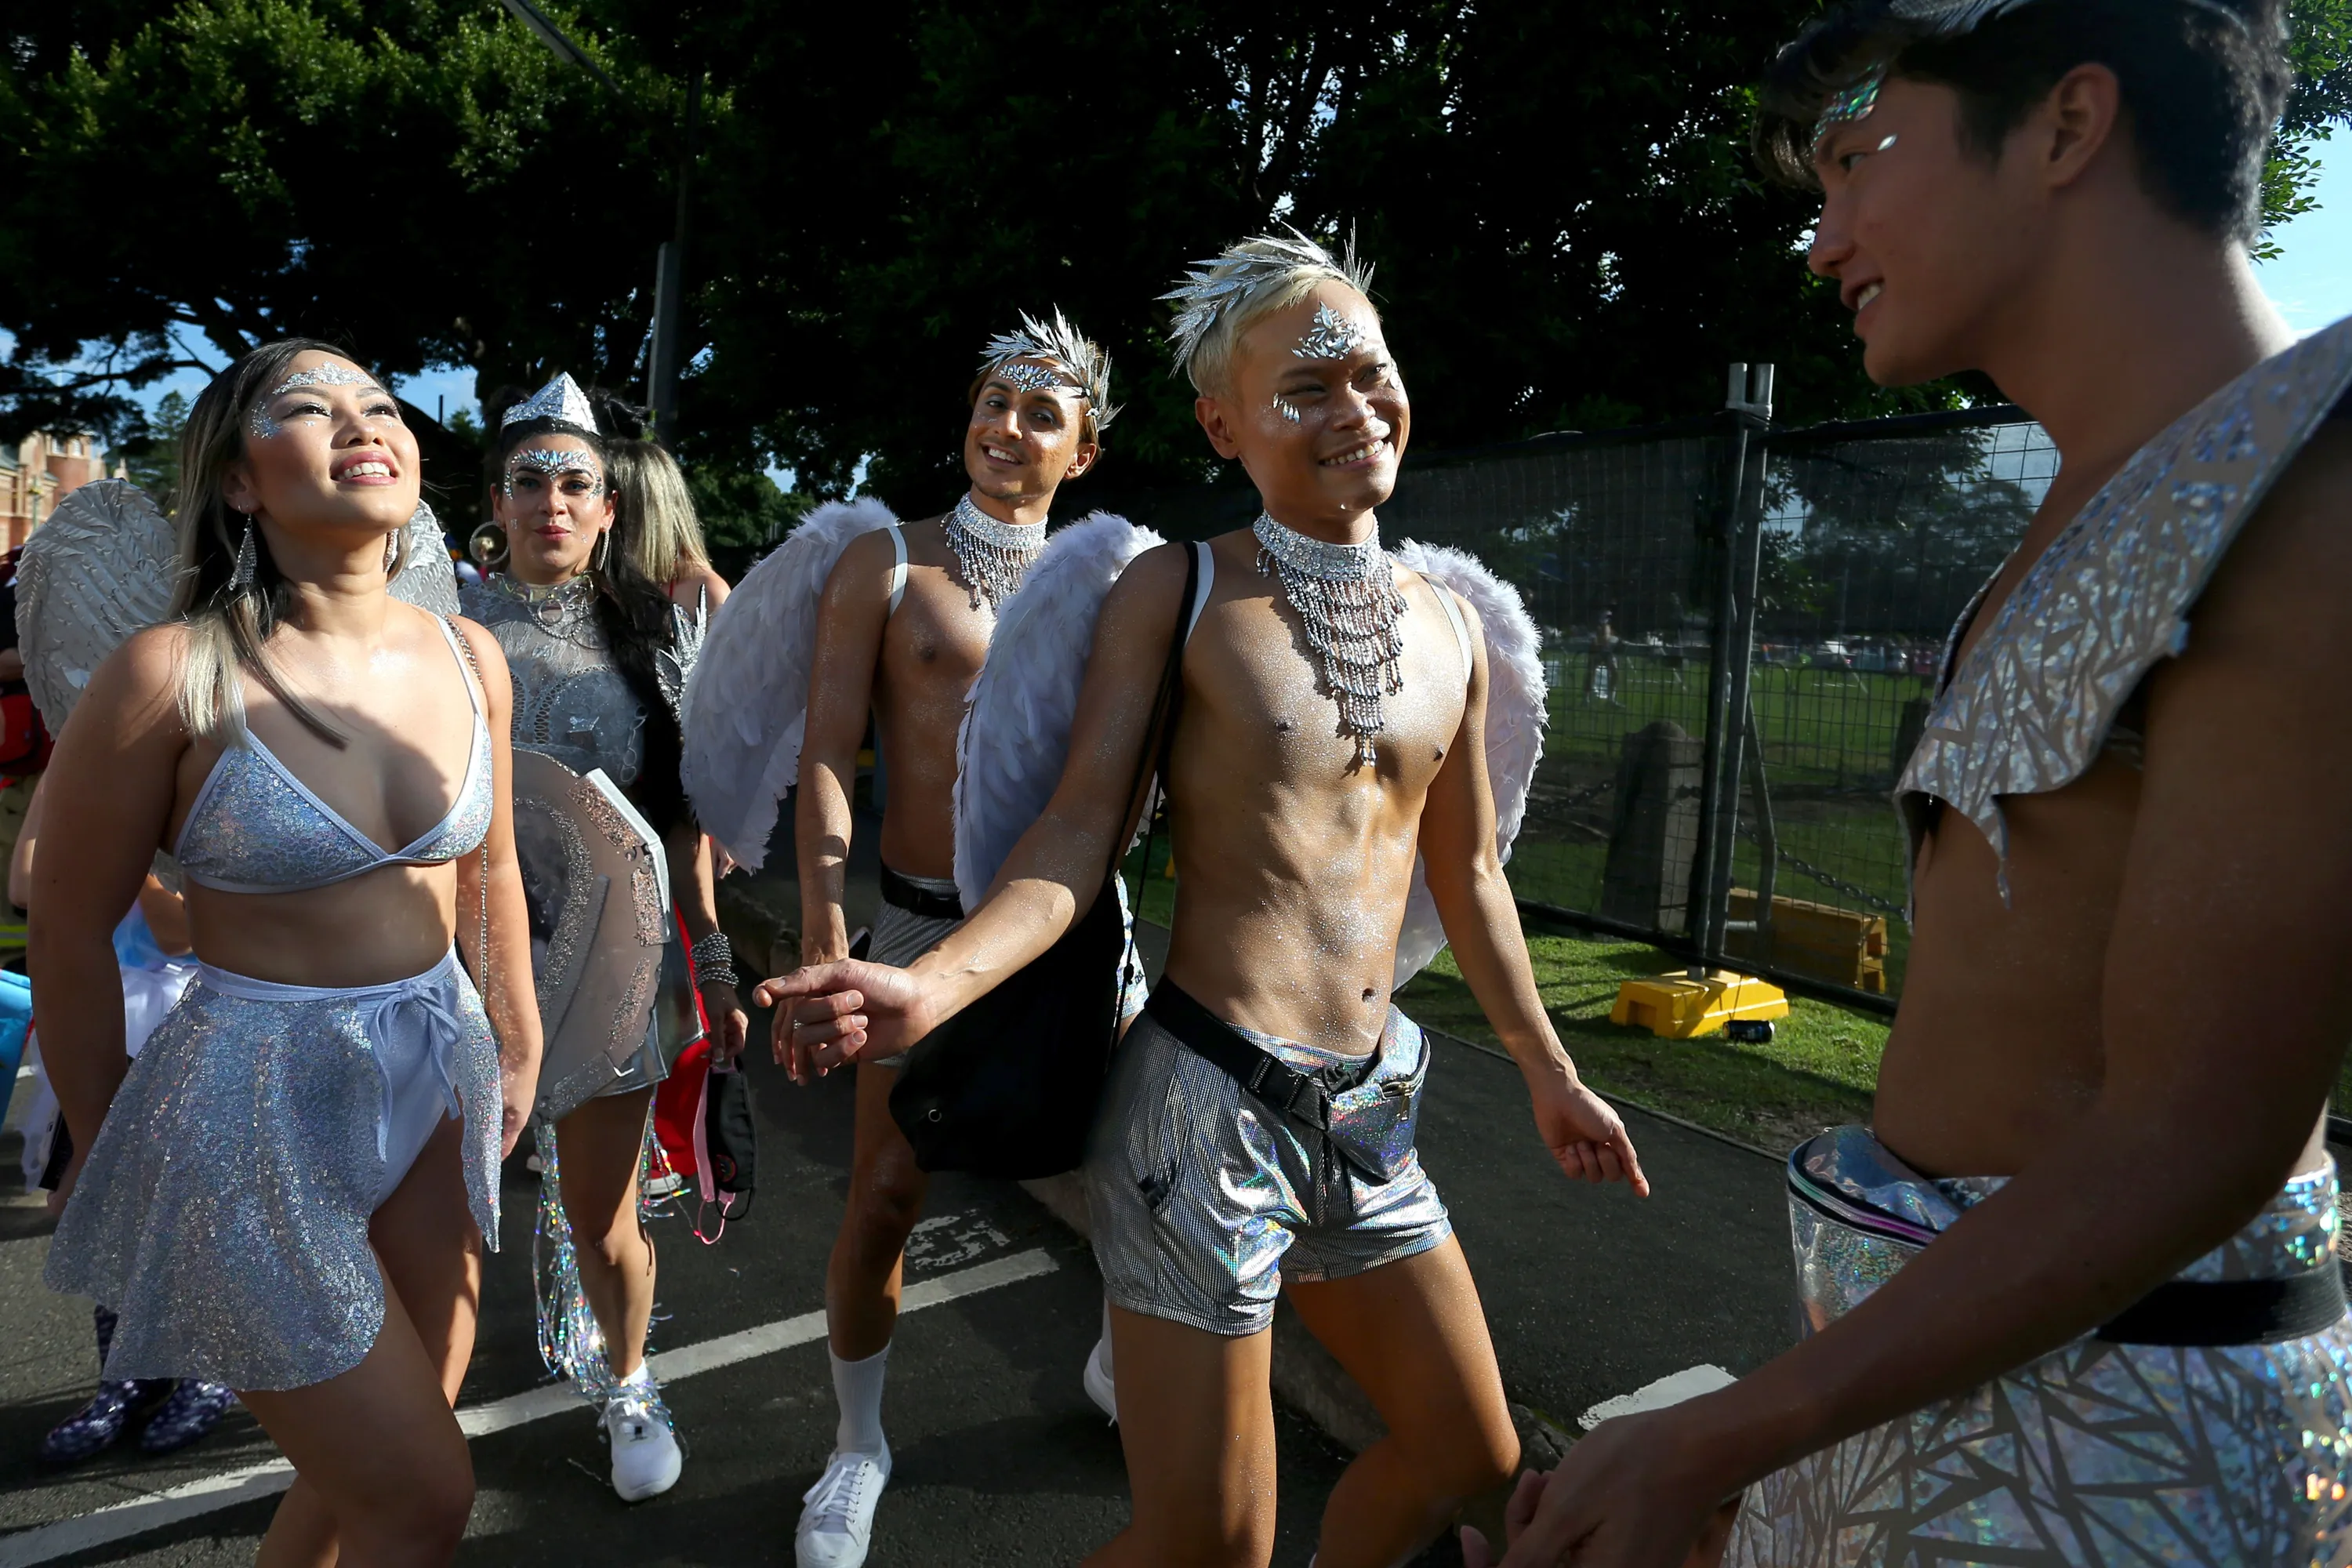 Parade goers arrive for the 44th Sydney Gay and Lesbian Mardi Gras Parade o...